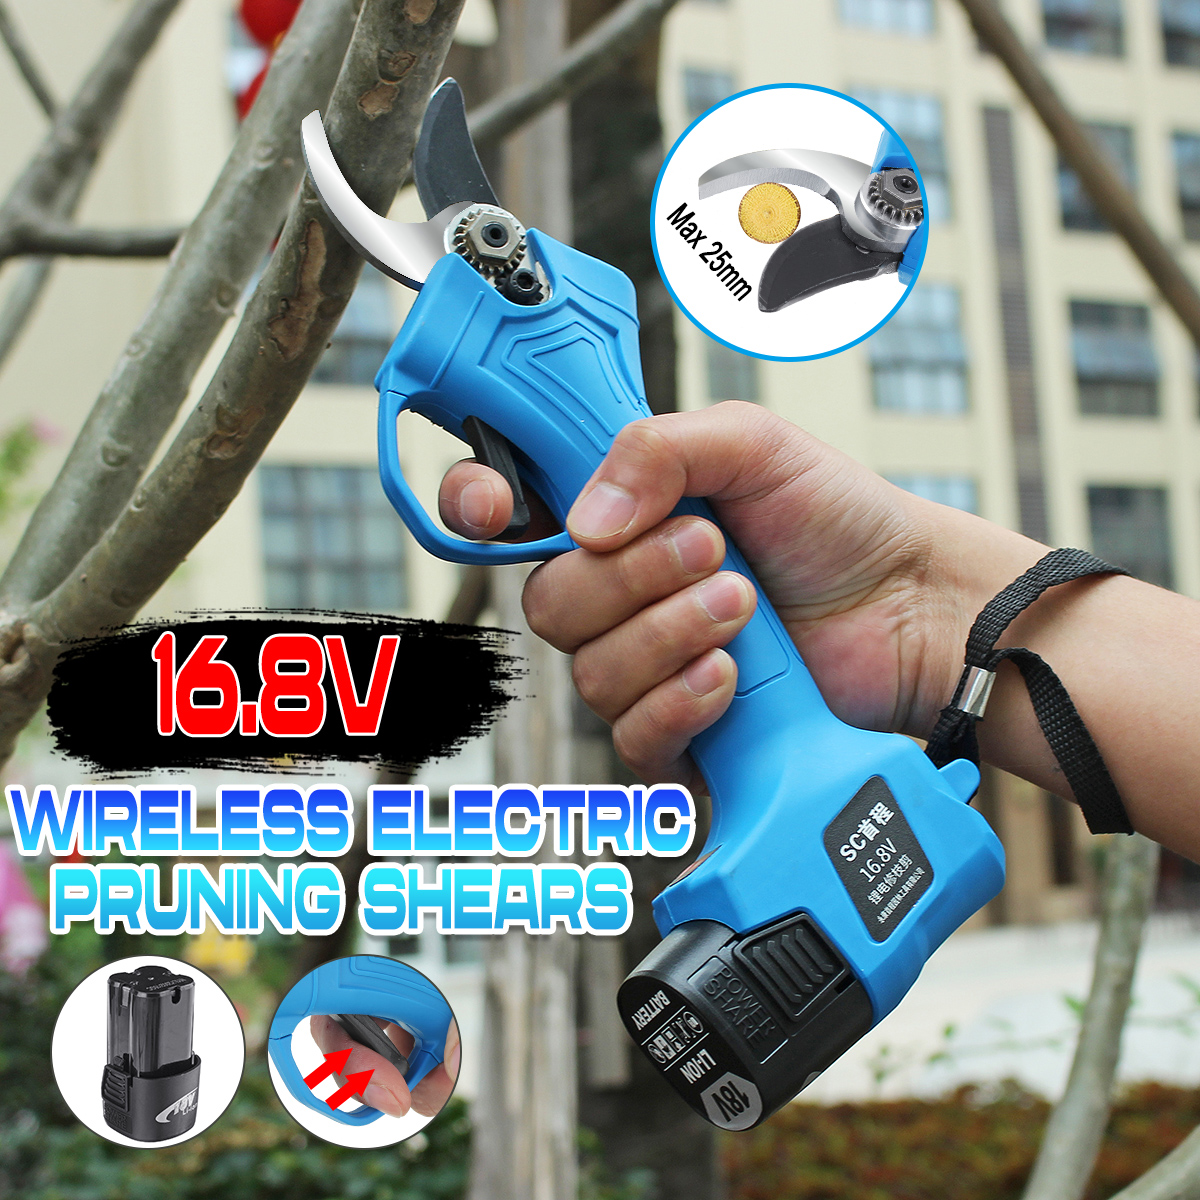 168V-Wireless-25mm-Rechargeable-Electric-Pruning-Shears-Scissors-Branch-Tree-Cutting-Trimming-Tools-1656246-2